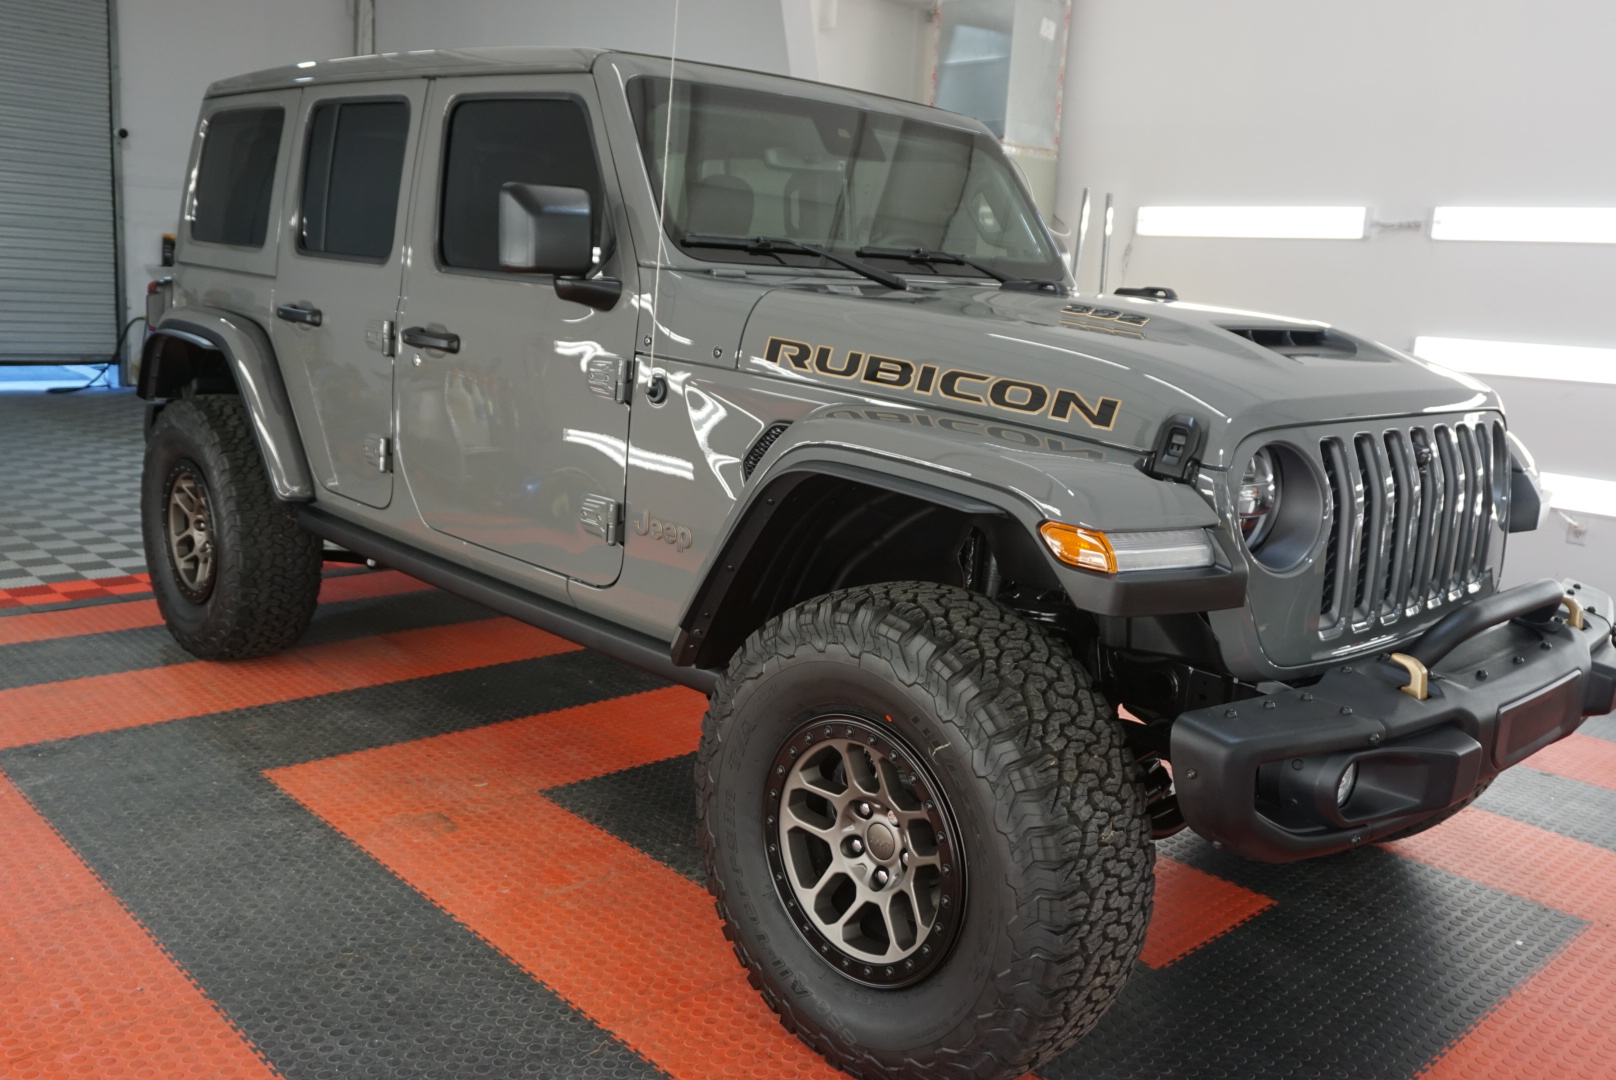 Paint Protection Film (PPF) of a 2021 Jeep Wrangler